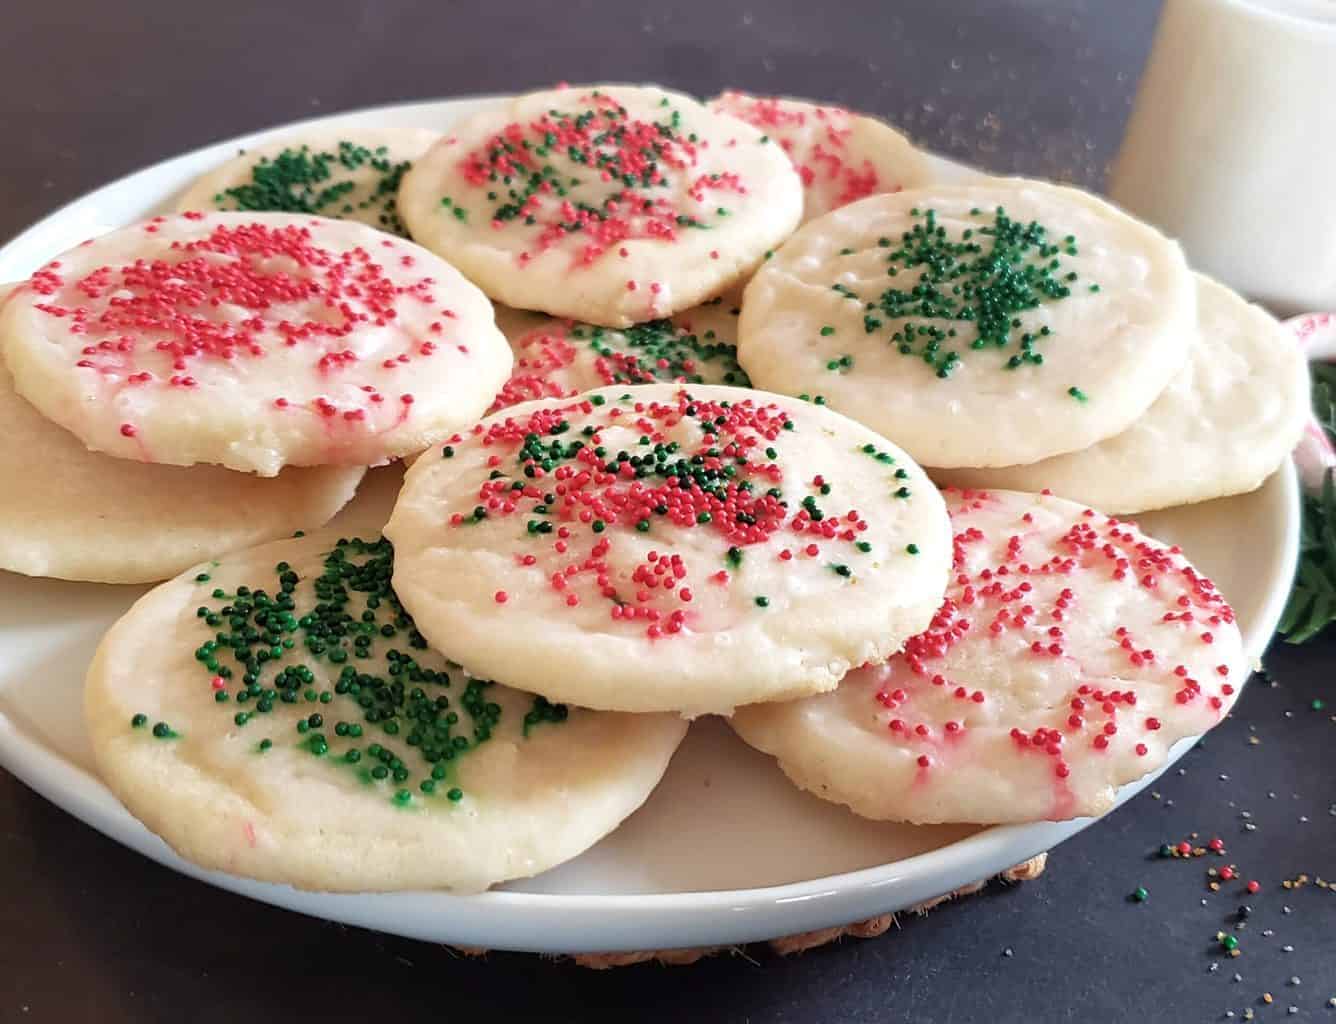 Soft and buttery cookies garnished with red and green sprinkles are stacked on white dessert plate.